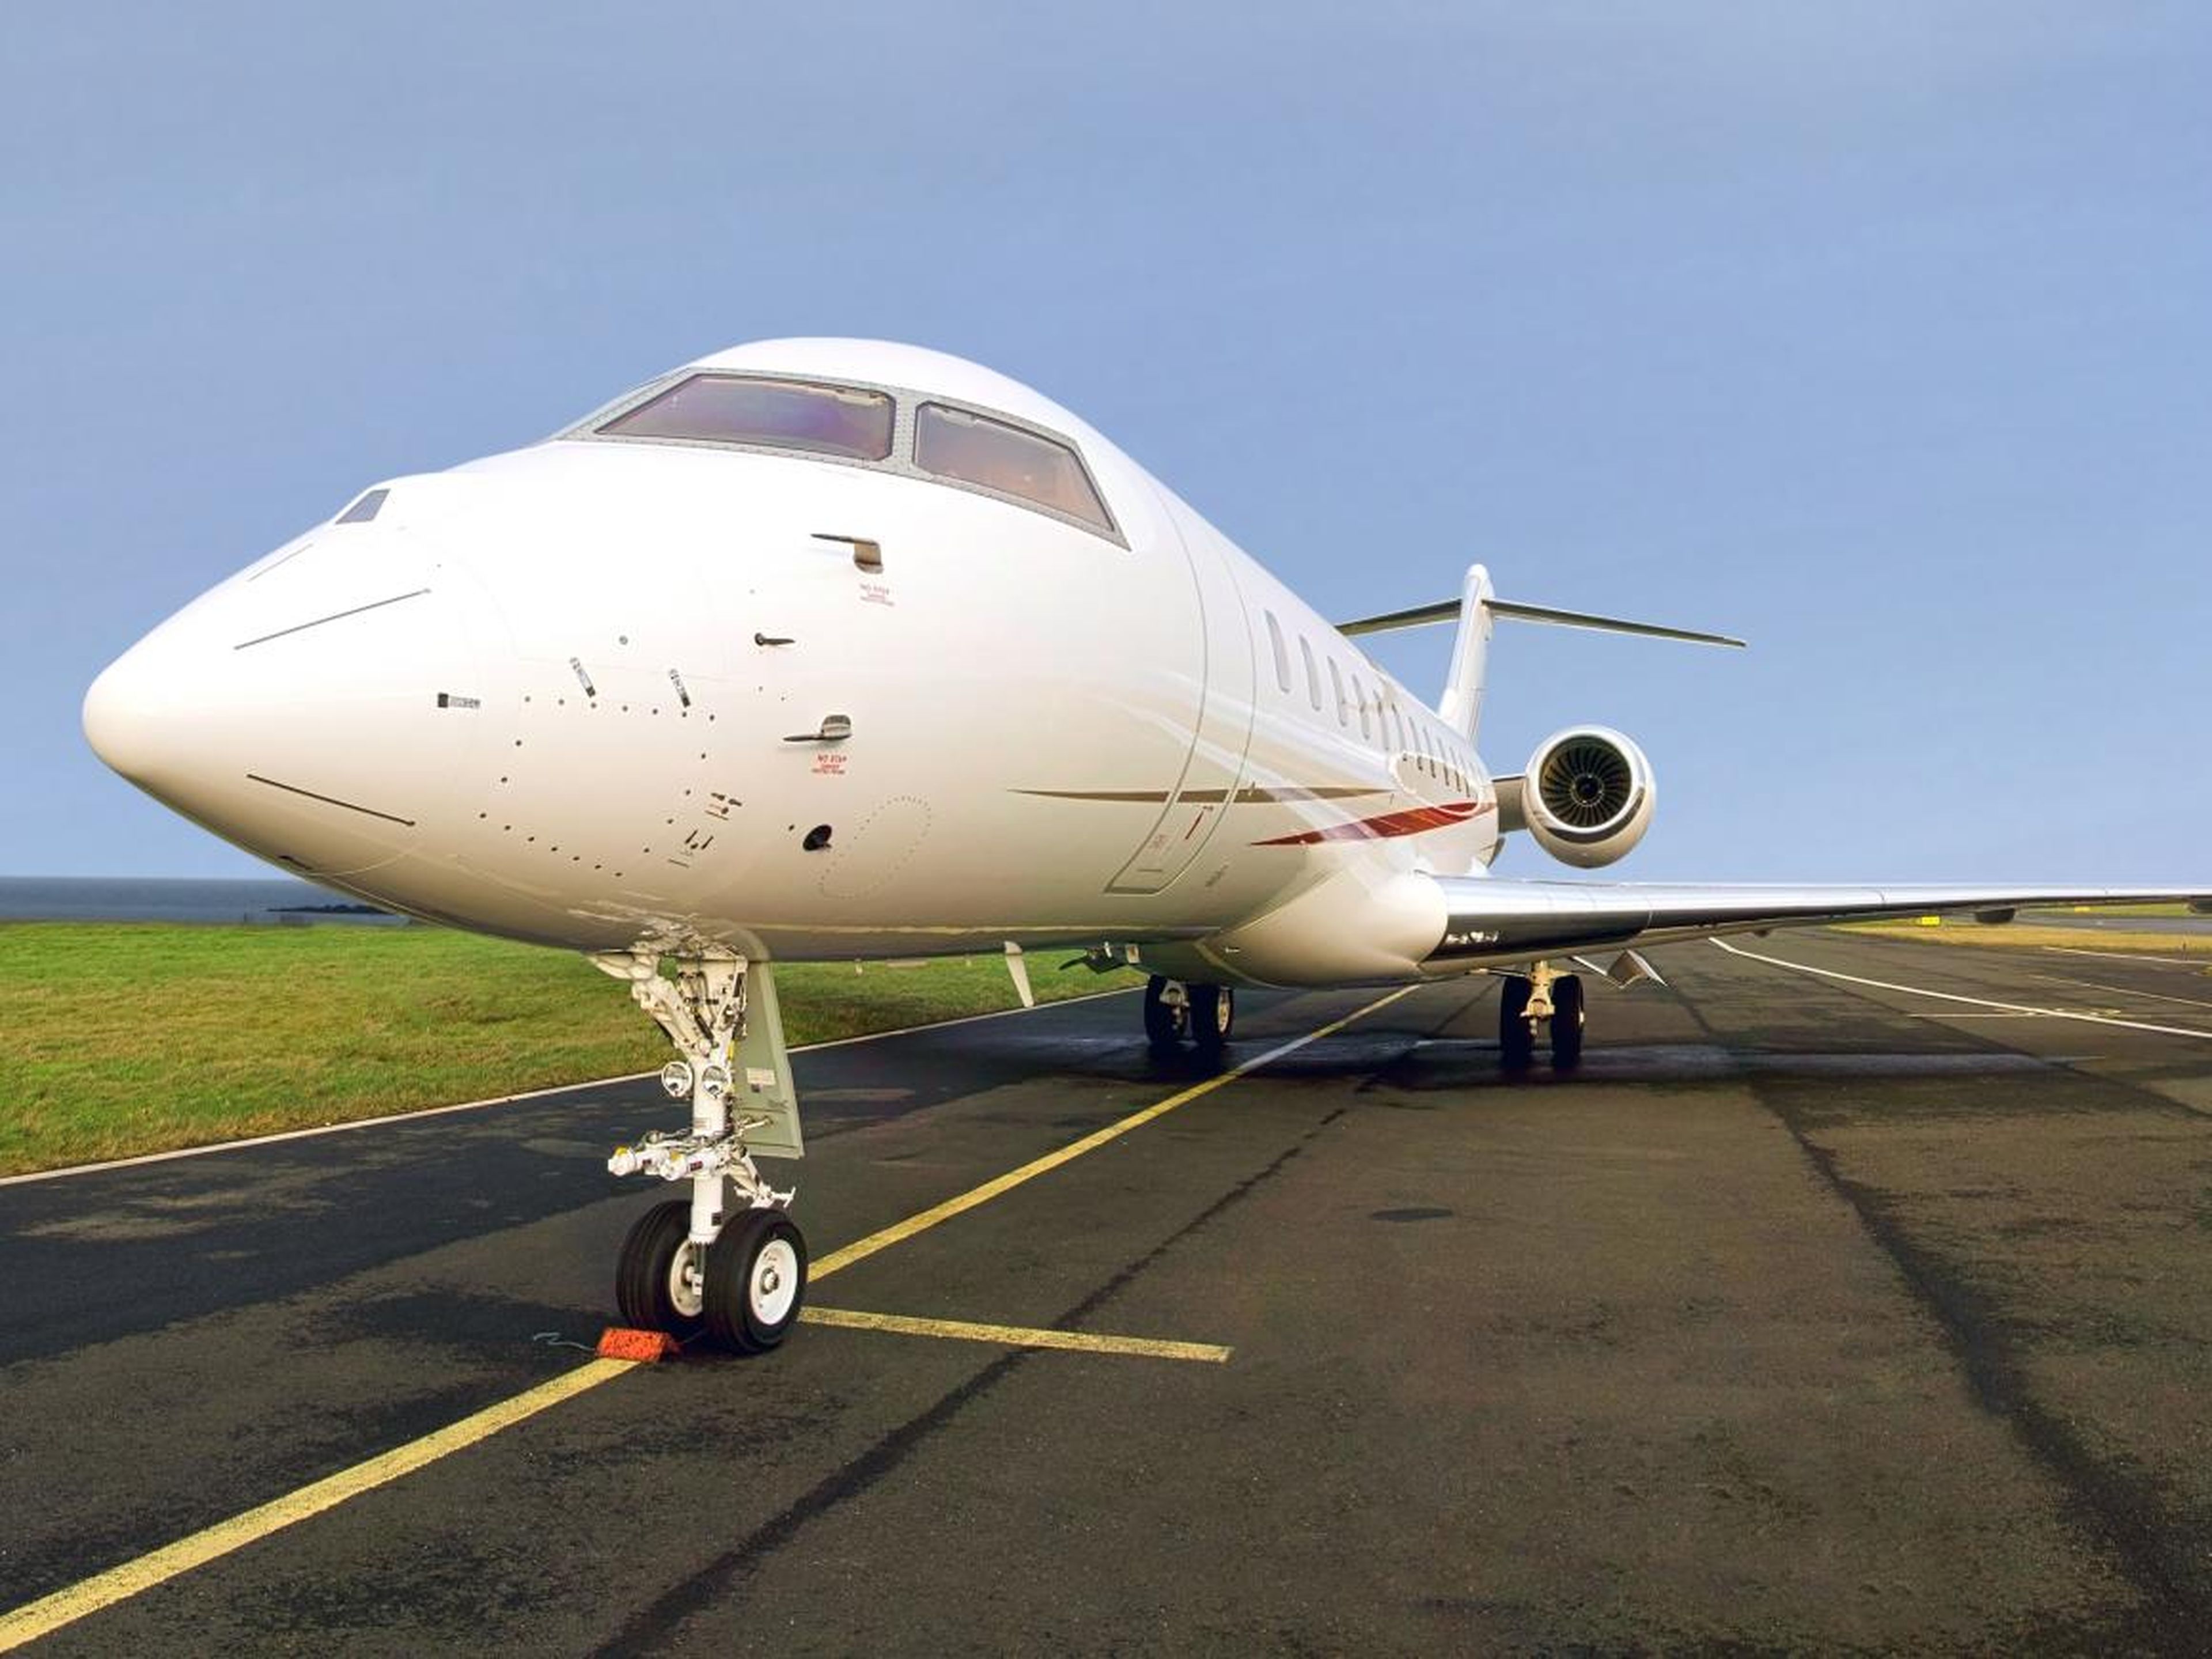 The Bombardier Global Express debuted back in 1998. In the years since, it has spawned a family of large private jets.